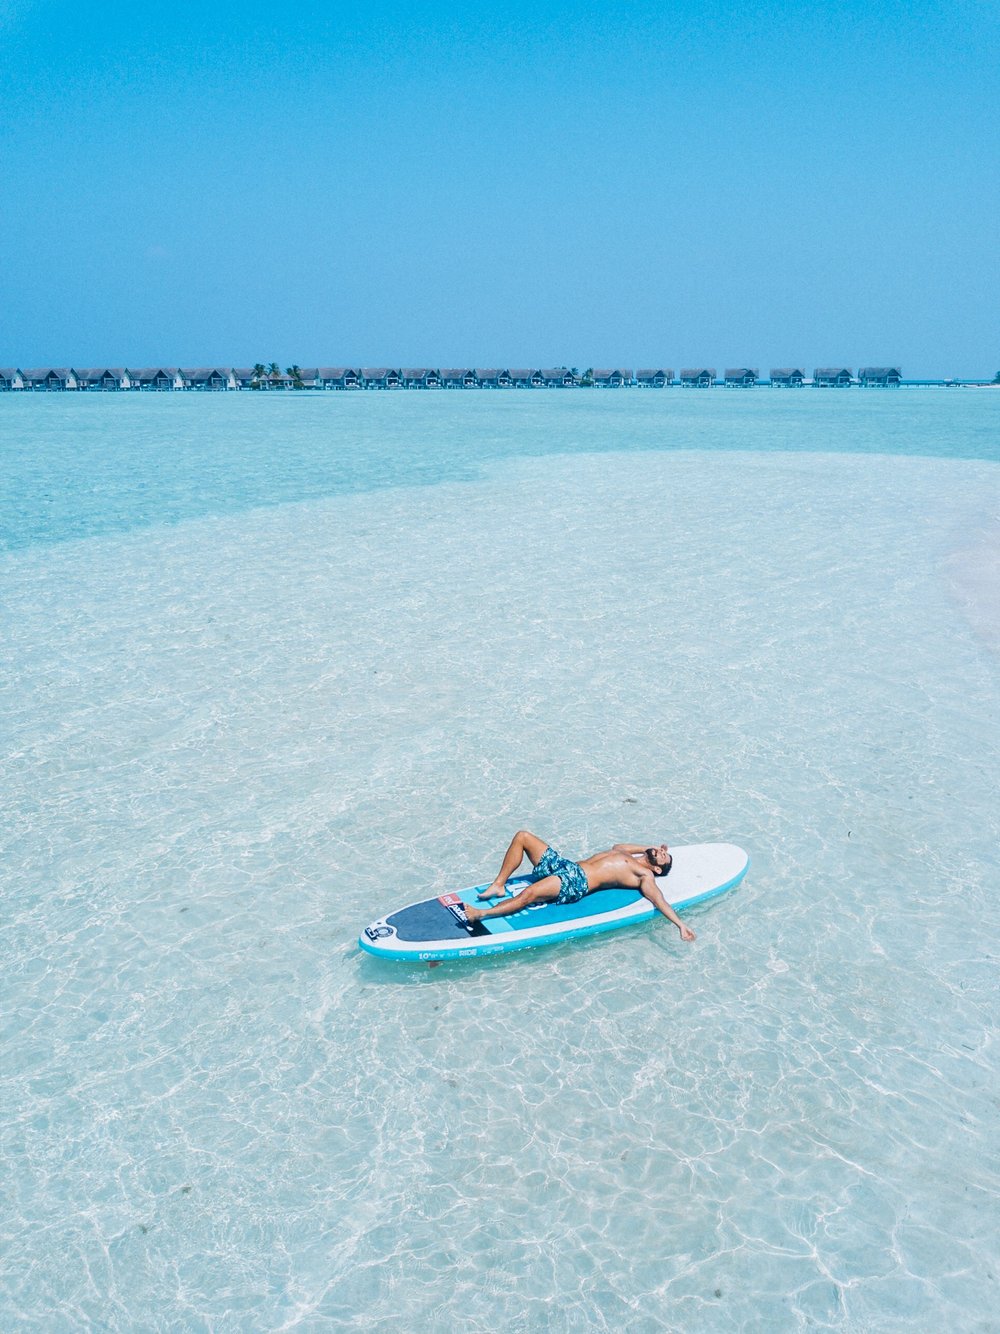 STAND UP PADDLING OR RELAXING?